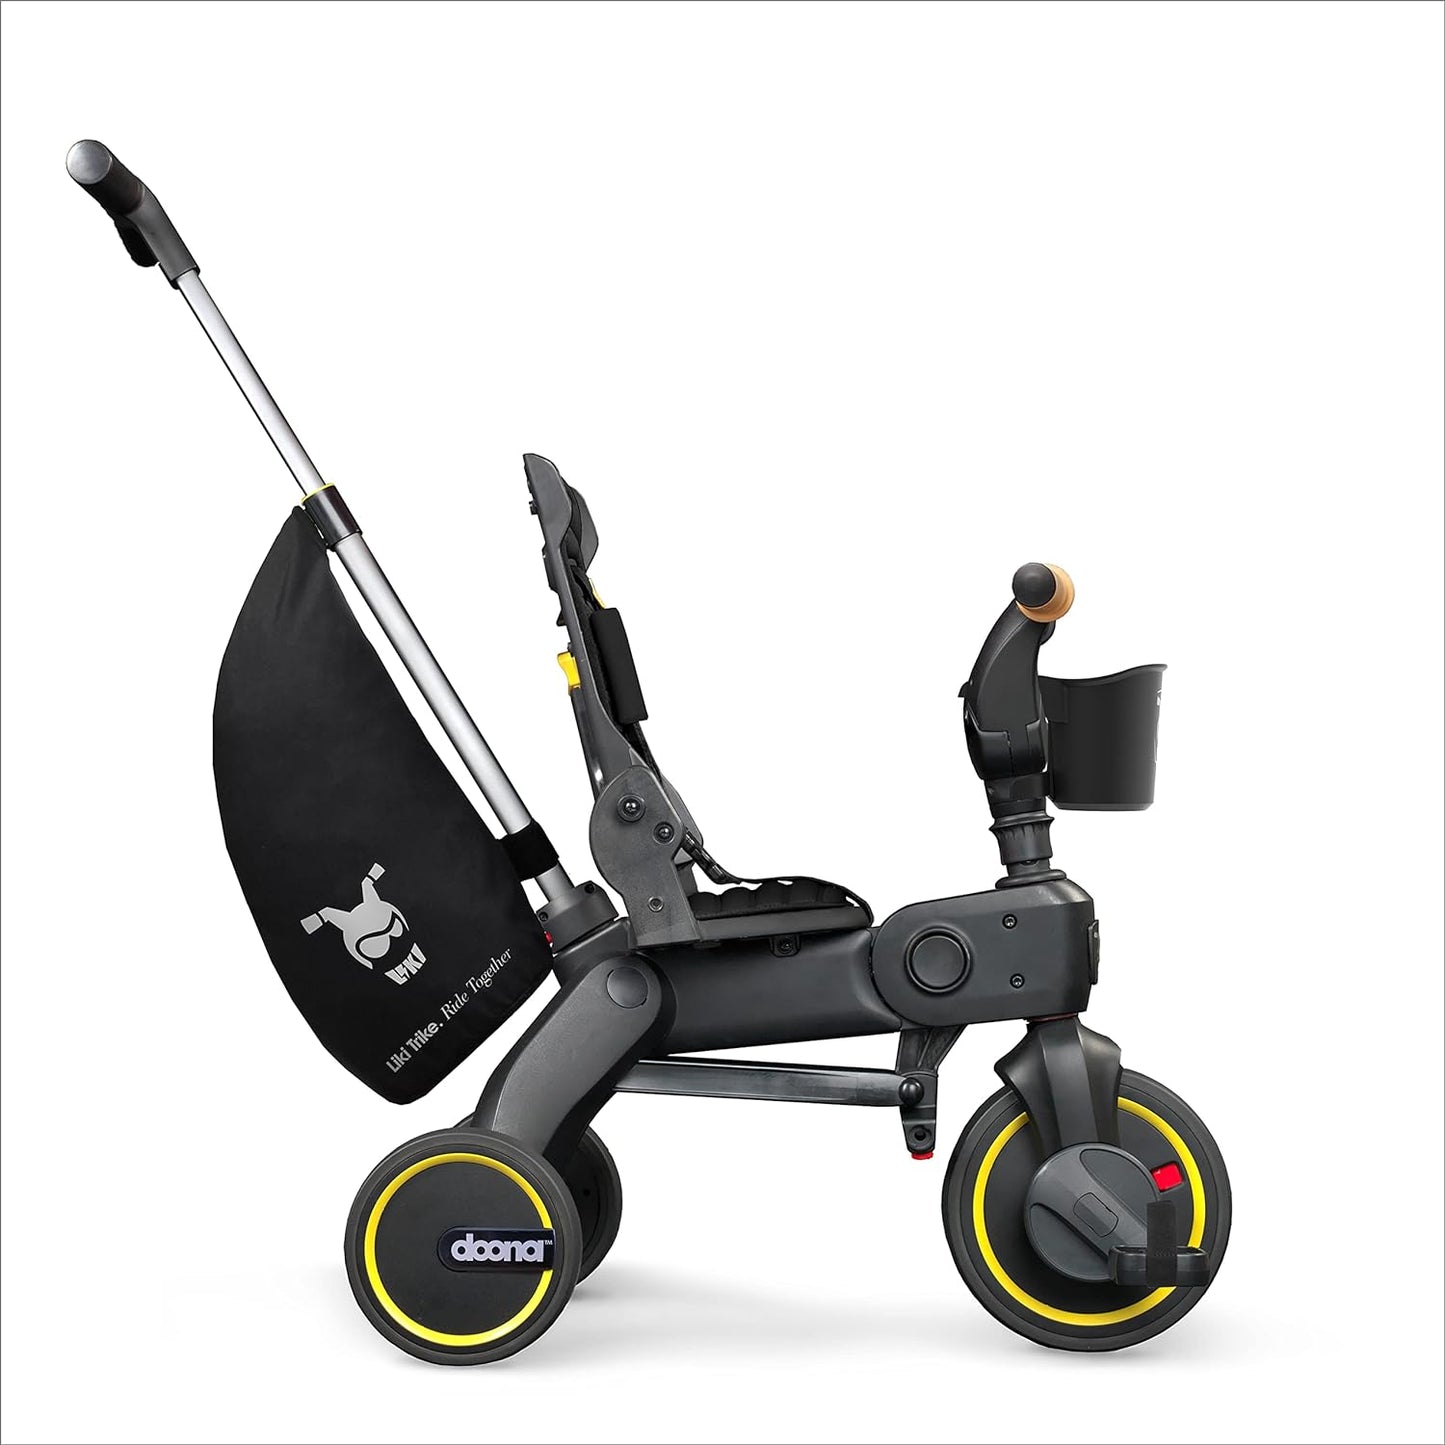 Doona Liki Trike S3 - Premium Foldable for Toddlers, Toddler Tricycle Stroller, Push and Fold Ages 10 Months to 3 Years, Grey Hound